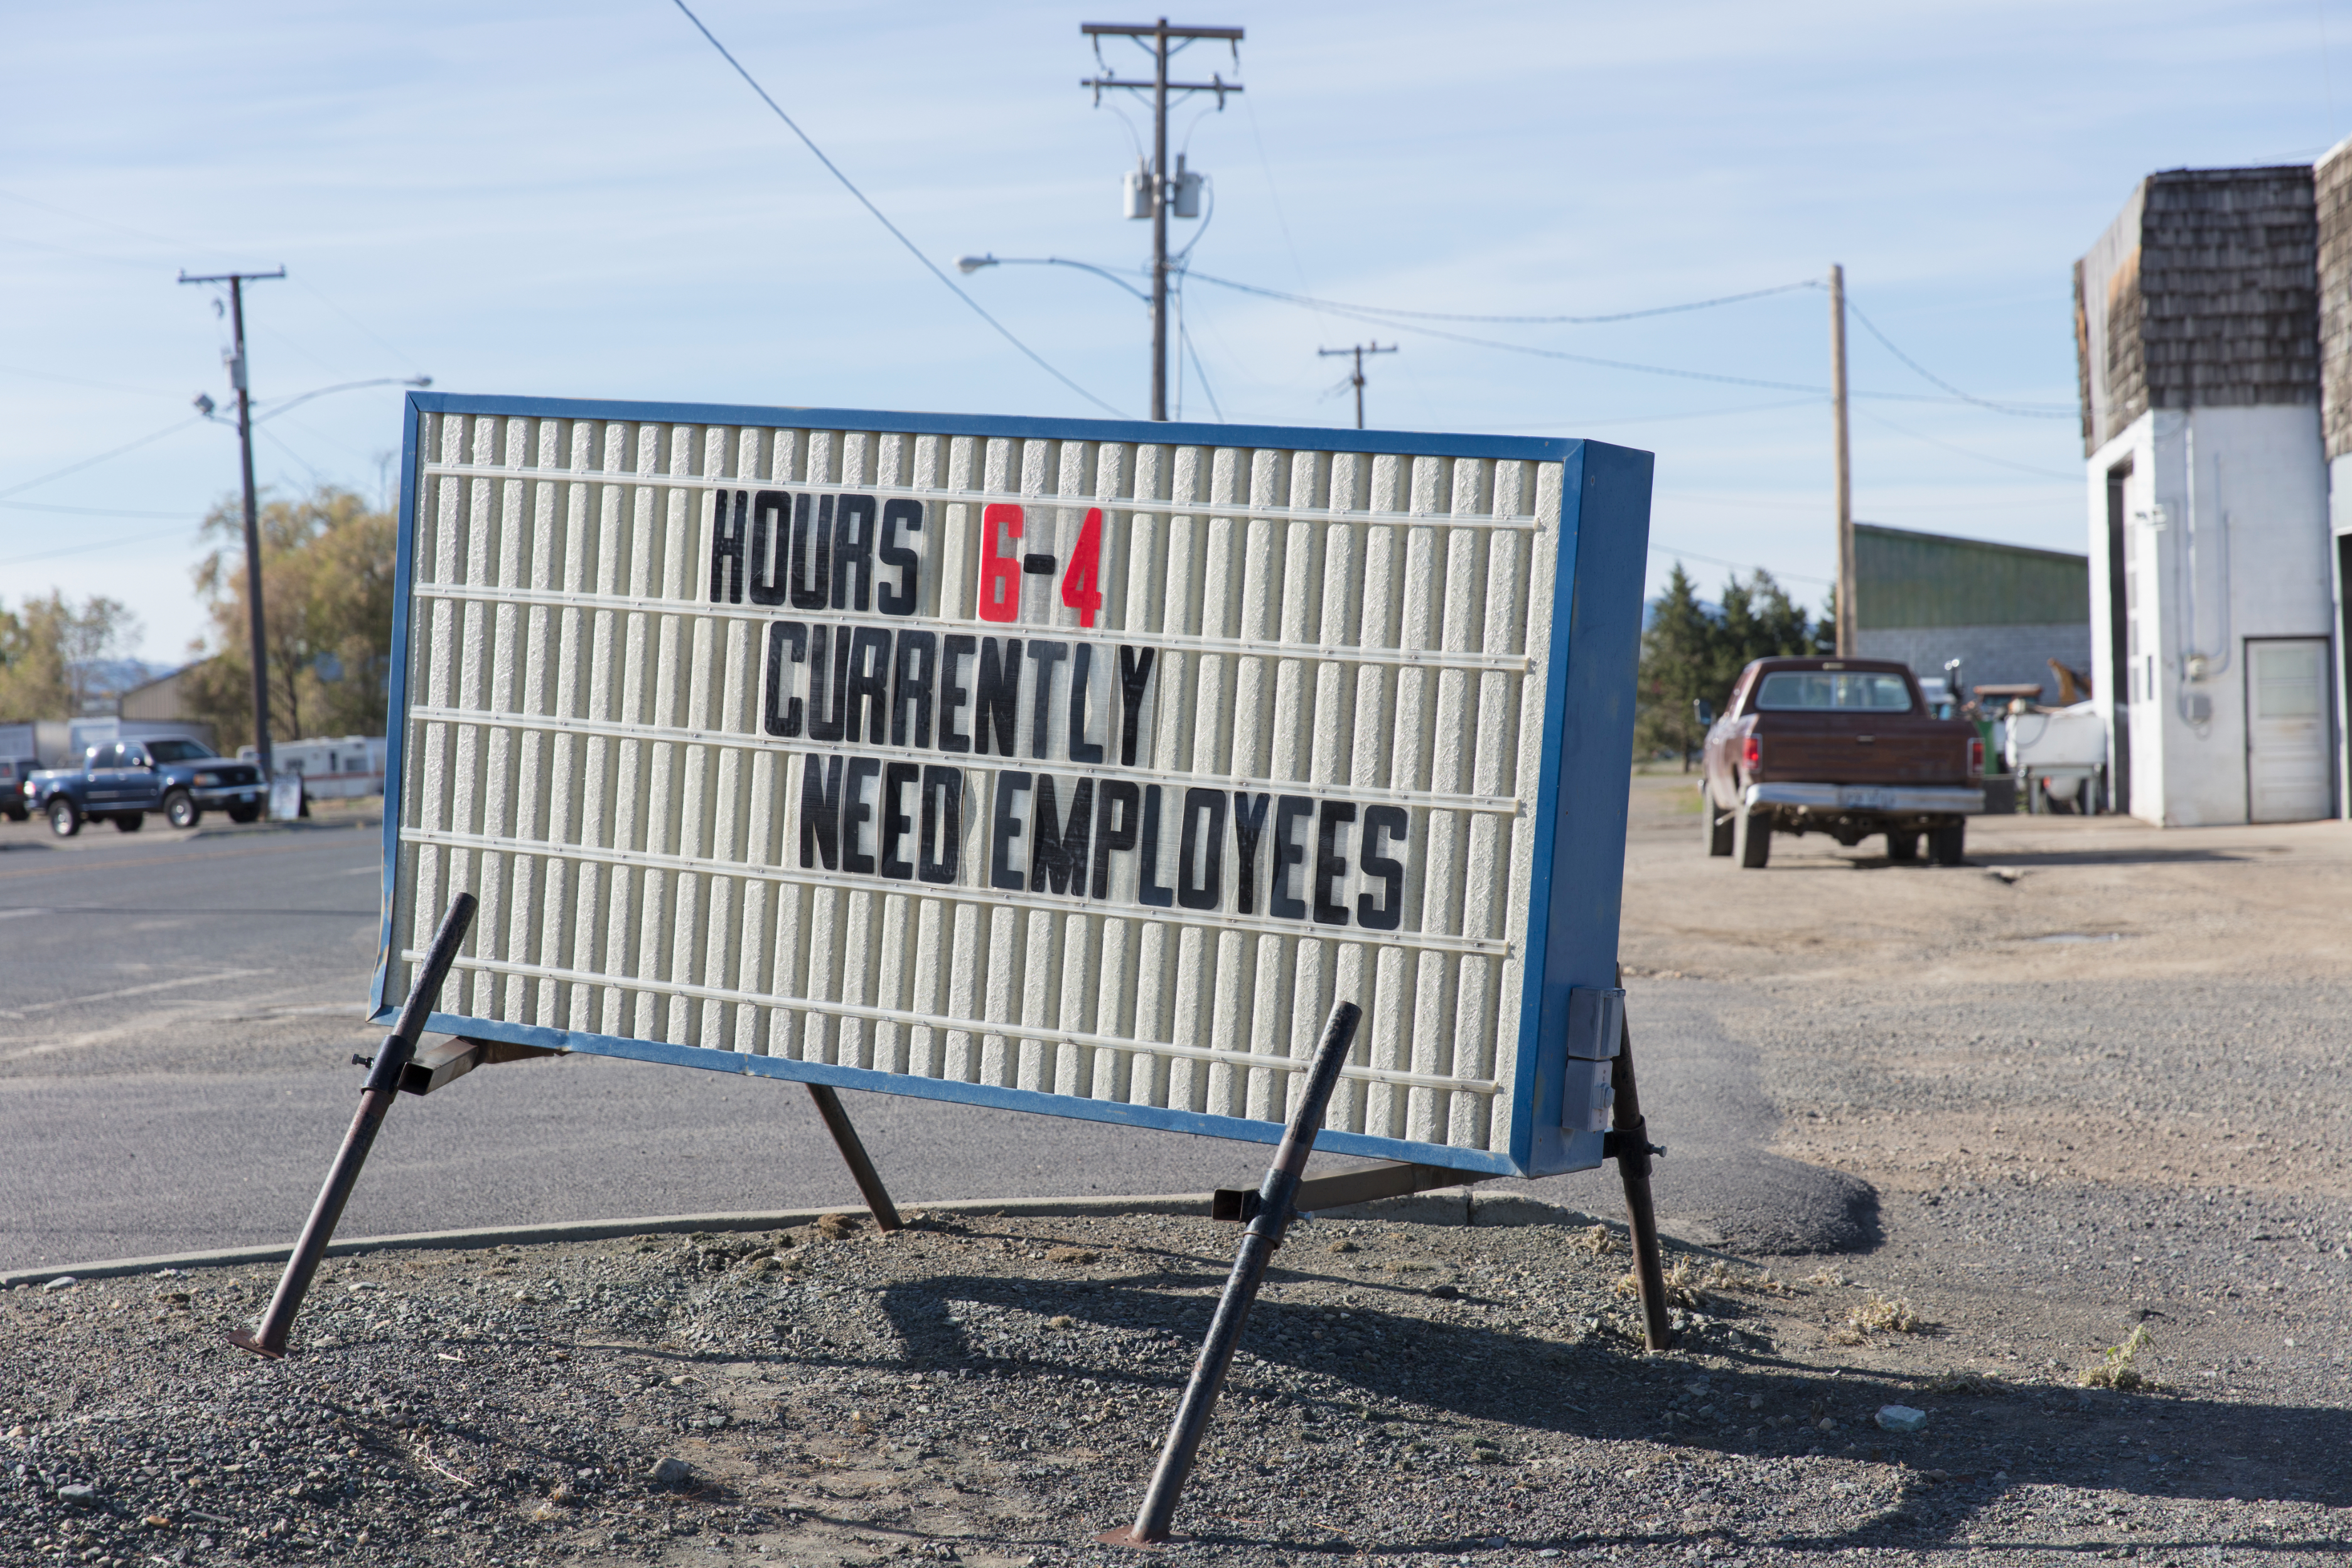 A sign asking for employees